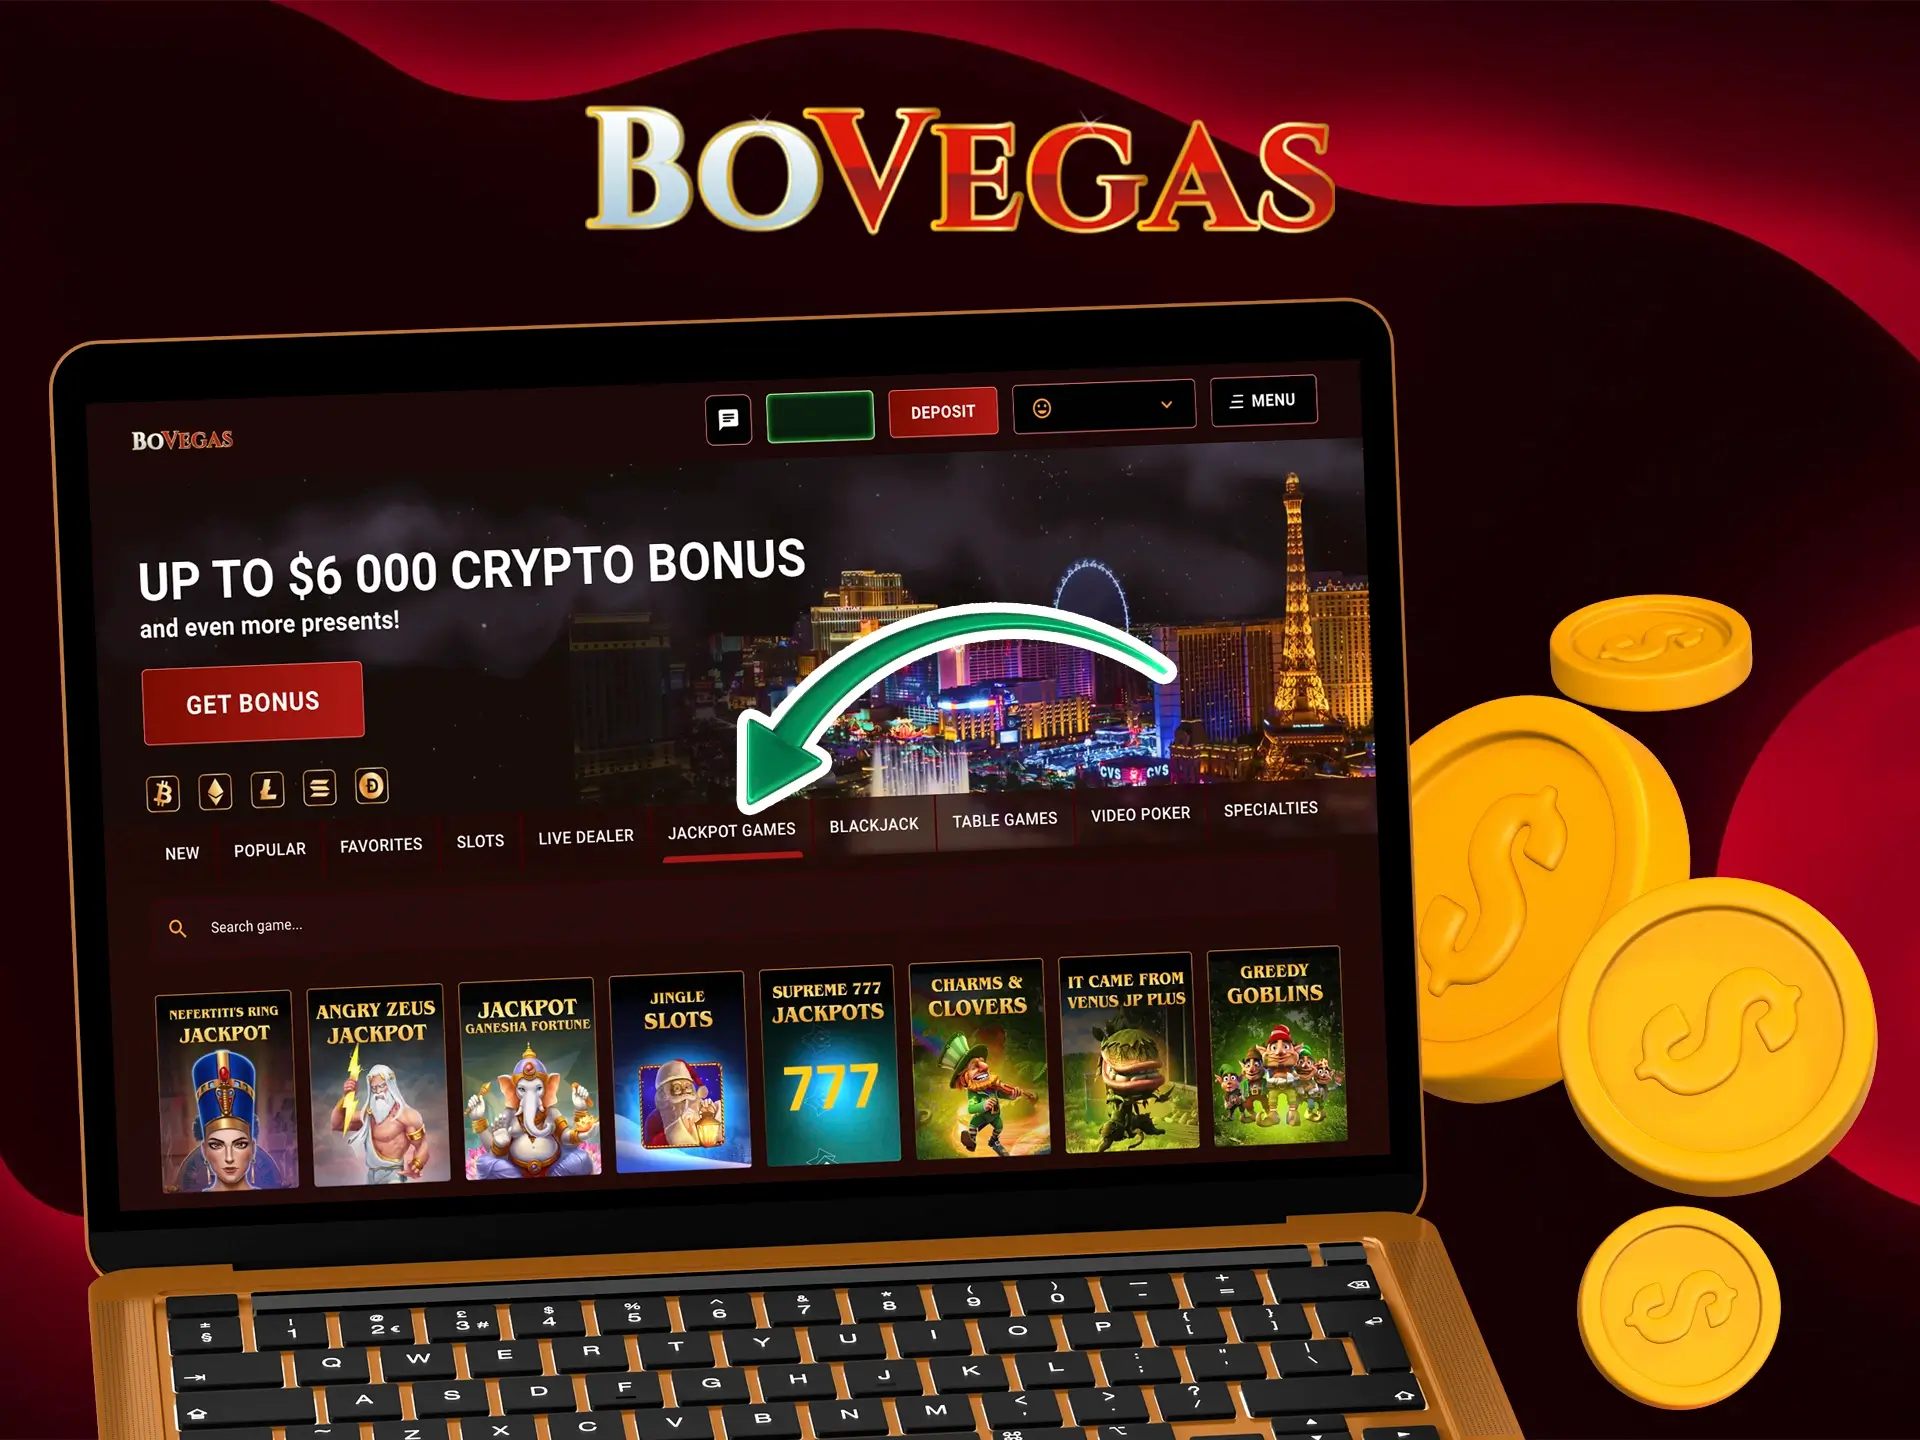 Log in to your BoVegas account and give yourself full access to the best jackpot casino games.